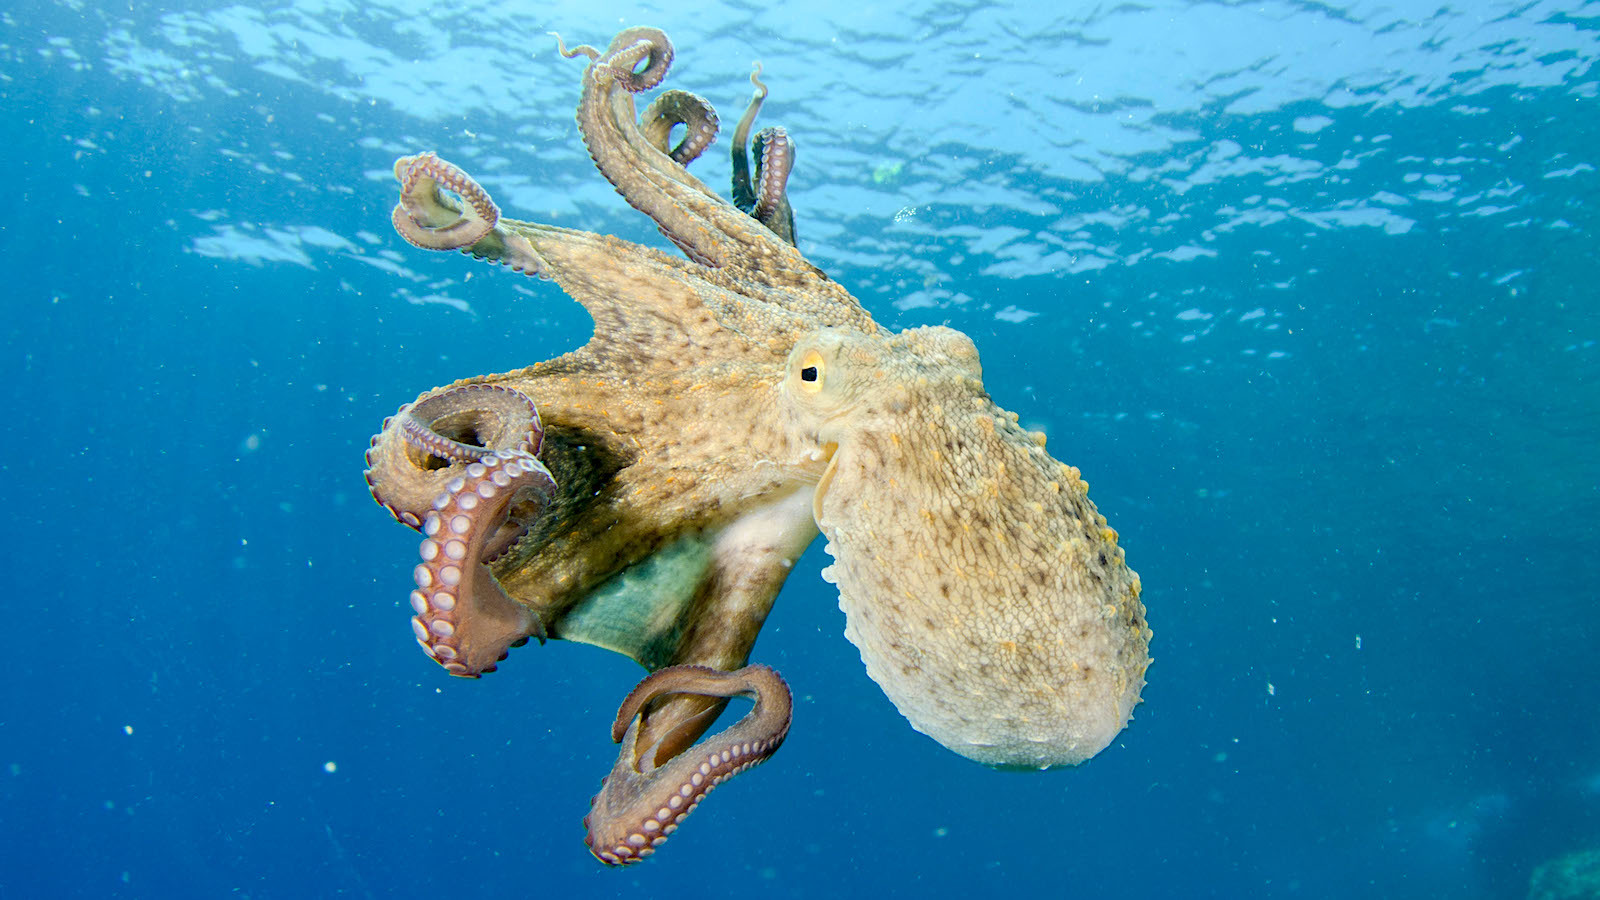 photo of Octopuses Are Highly Intelligent. Should They Be Farmed for Food? image